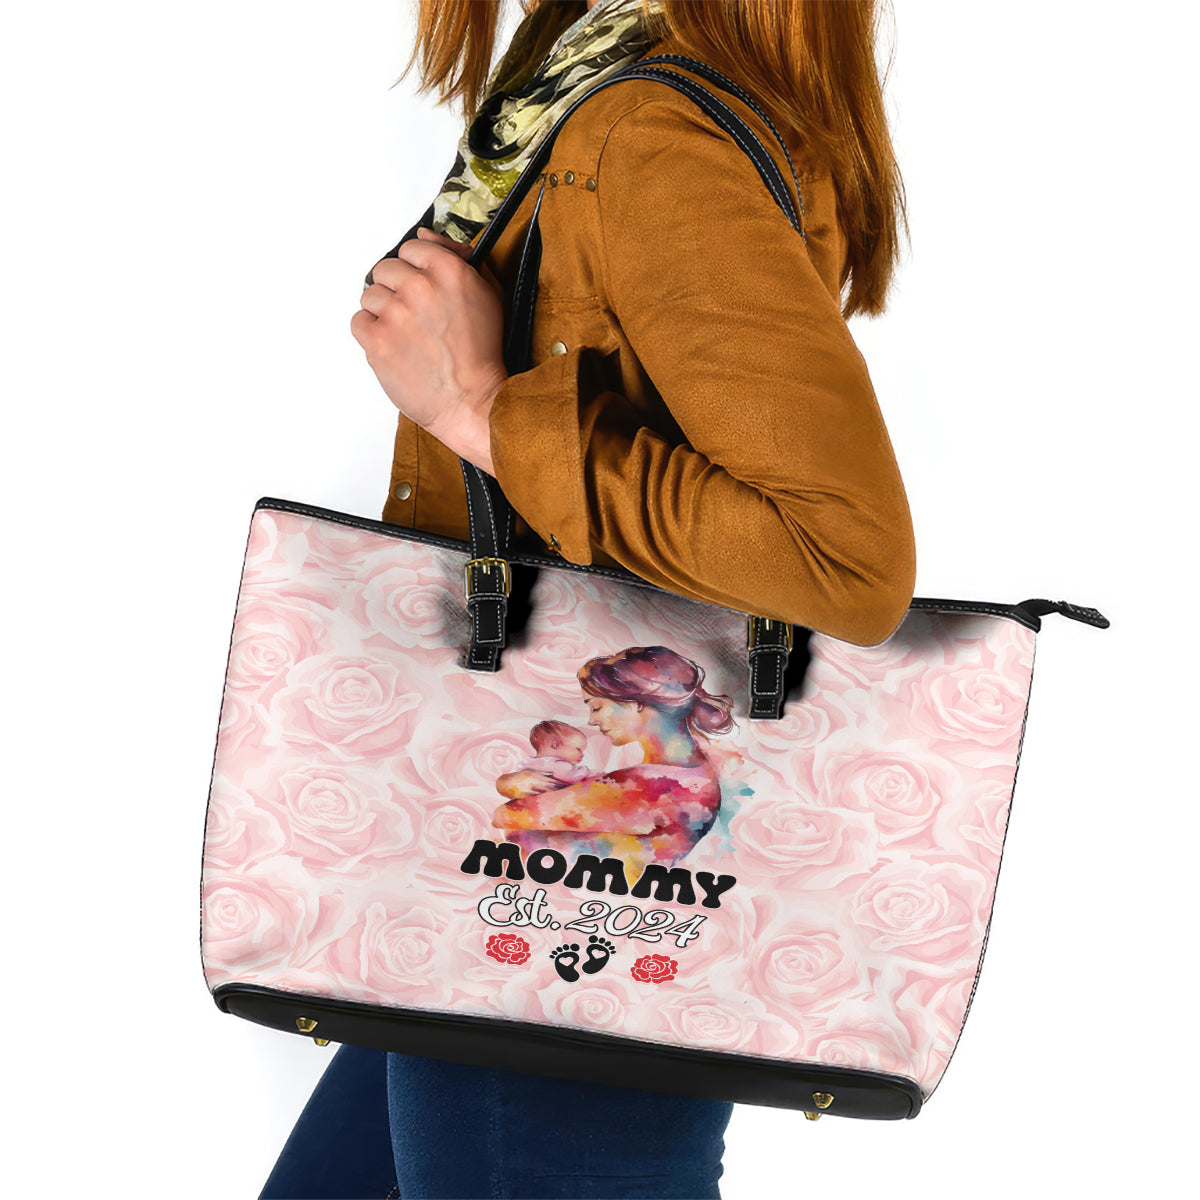 Happy Mother Day Leather Tote Bag Mommy Est 2024